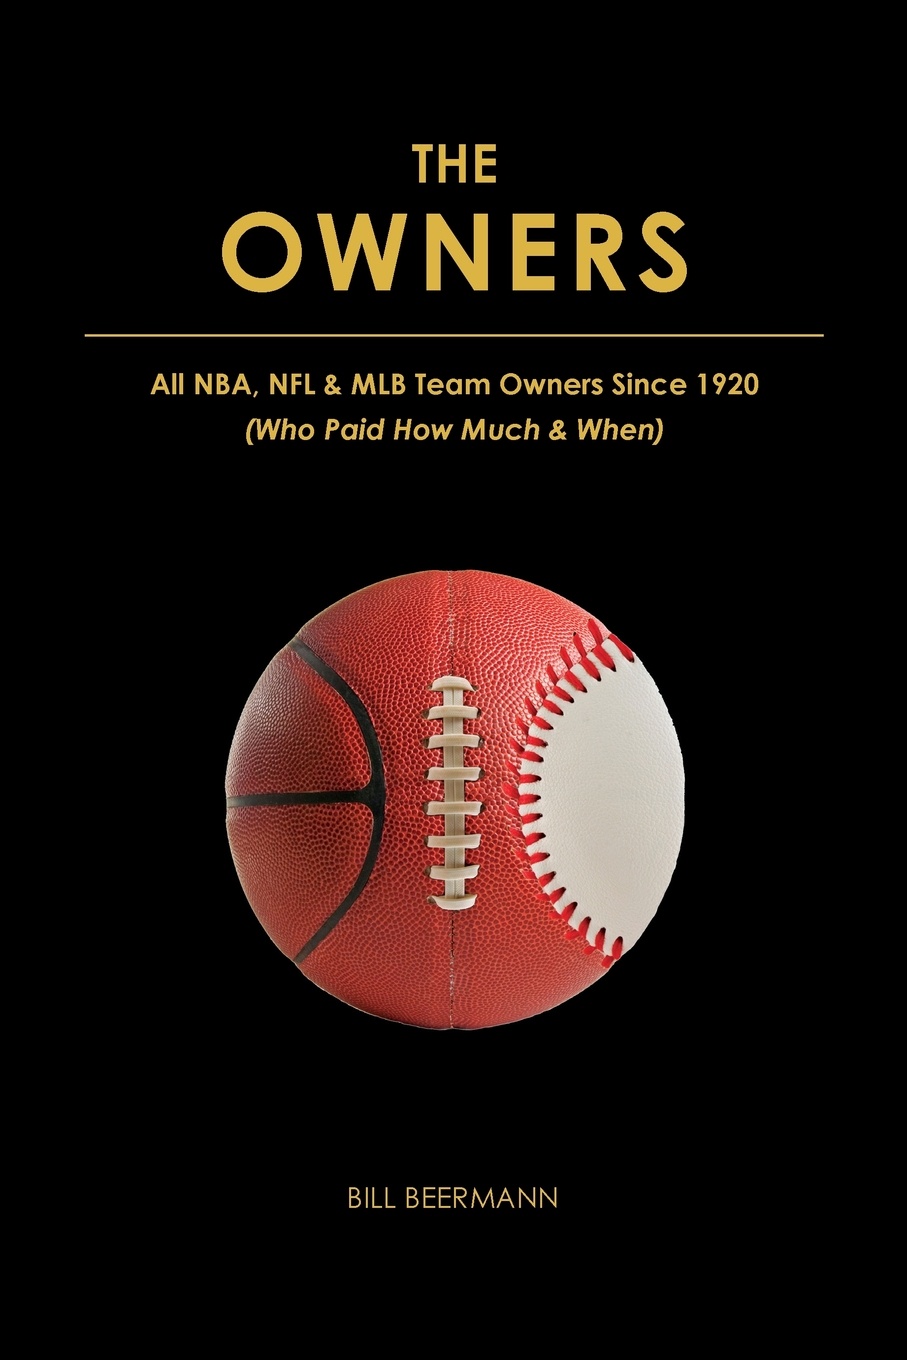 The OWNERS - All NBA, NFL & MLB Team Owners Since 1920. (Who Paid How Much & When)